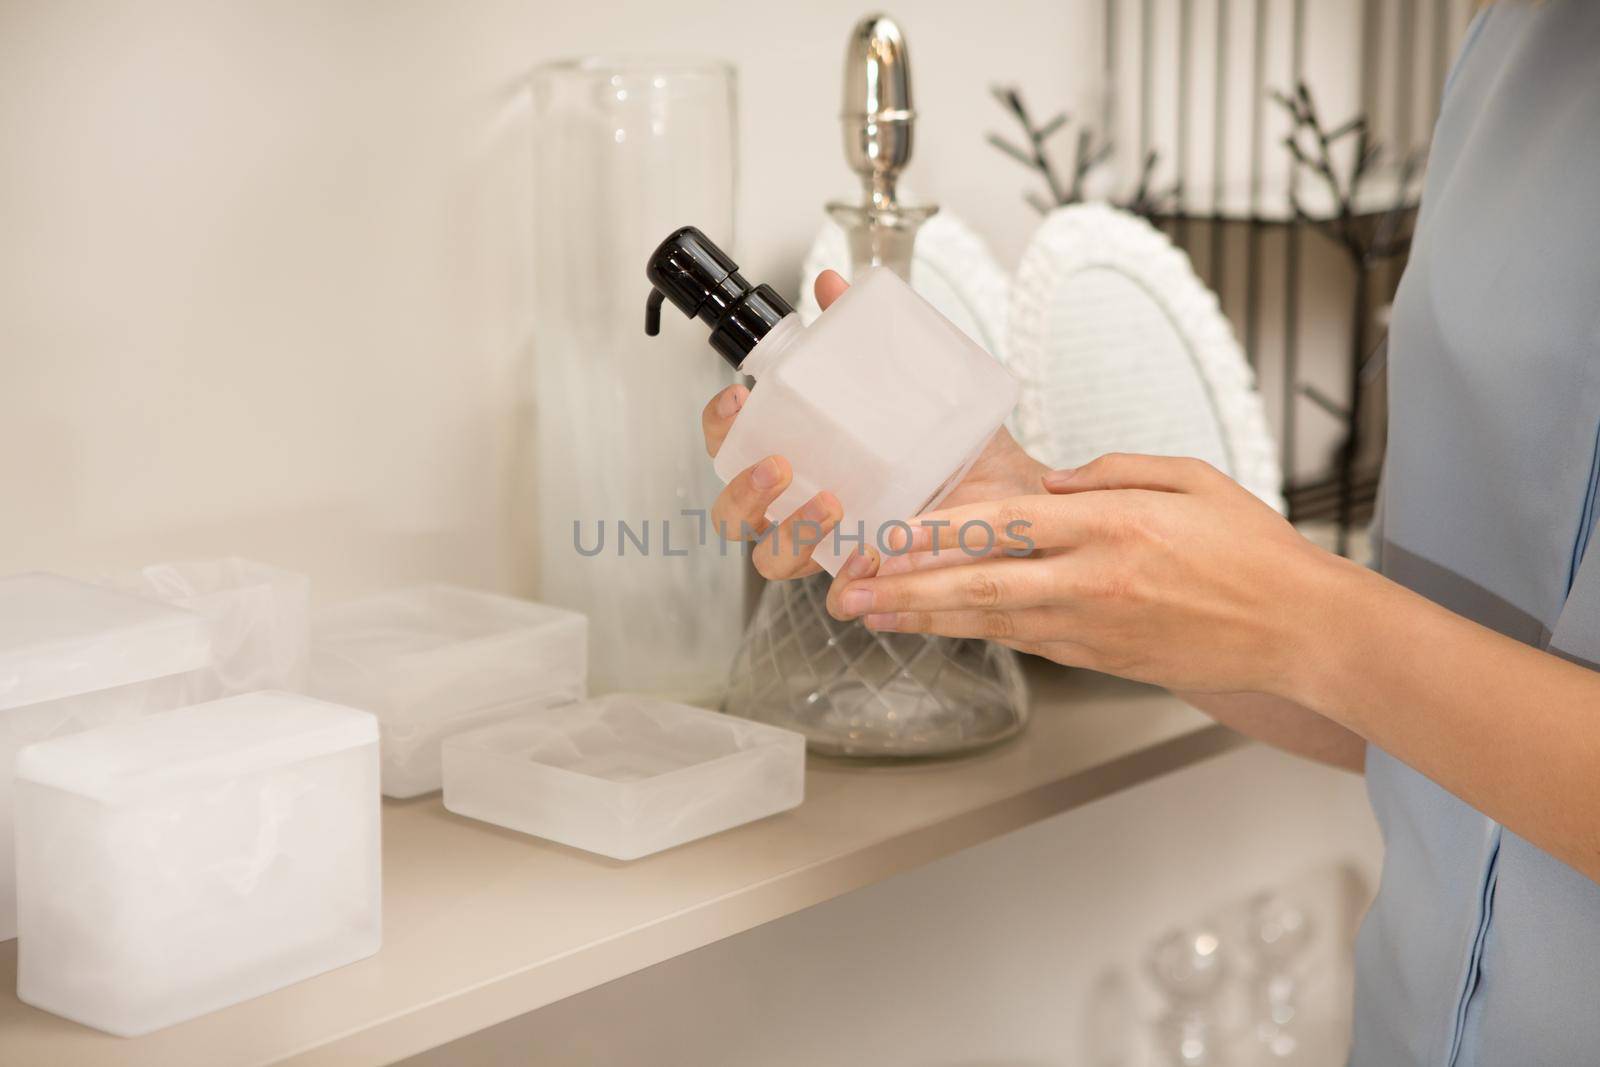 Cropped close up of a woman holding soap dispenser examining it while shopping at houseware store for bathroom accessories copyspace home consumerism purchase decor interior coziness buy